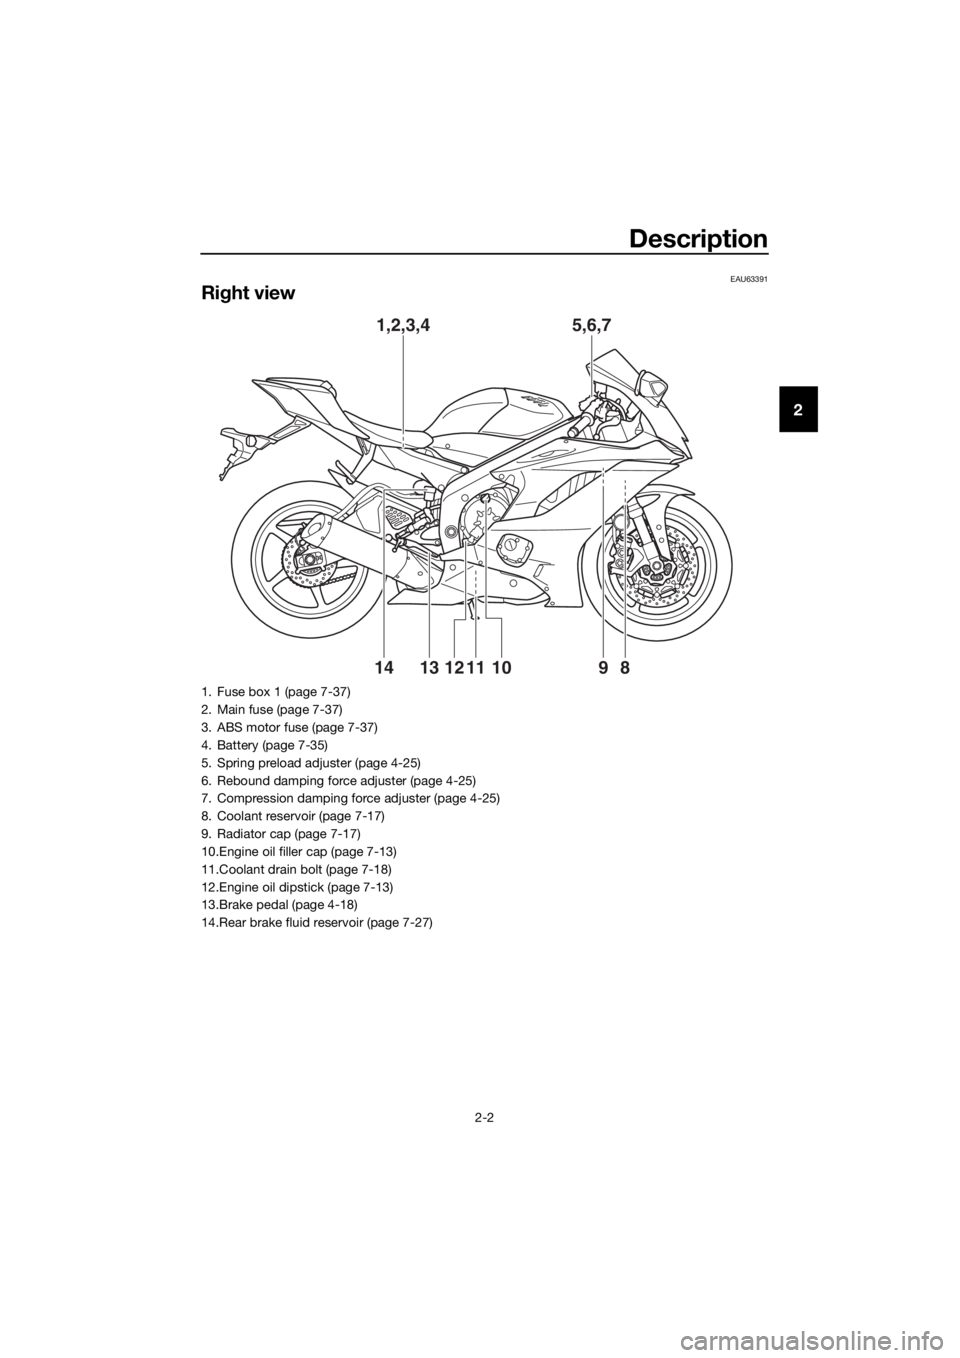 YAMAHA YZF-R6 2017  Owners Manual Description
2-2
2
EAU63391
Right view
1,2,3,45,6,7
9
8
11121314 10
1. Fuse box 1 (page 7-37)
2. Main fuse (page 7-37)
3. ABS motor fuse (page 7-37)
4. Battery (page 7-35)
5. Spring preload adjuster (p